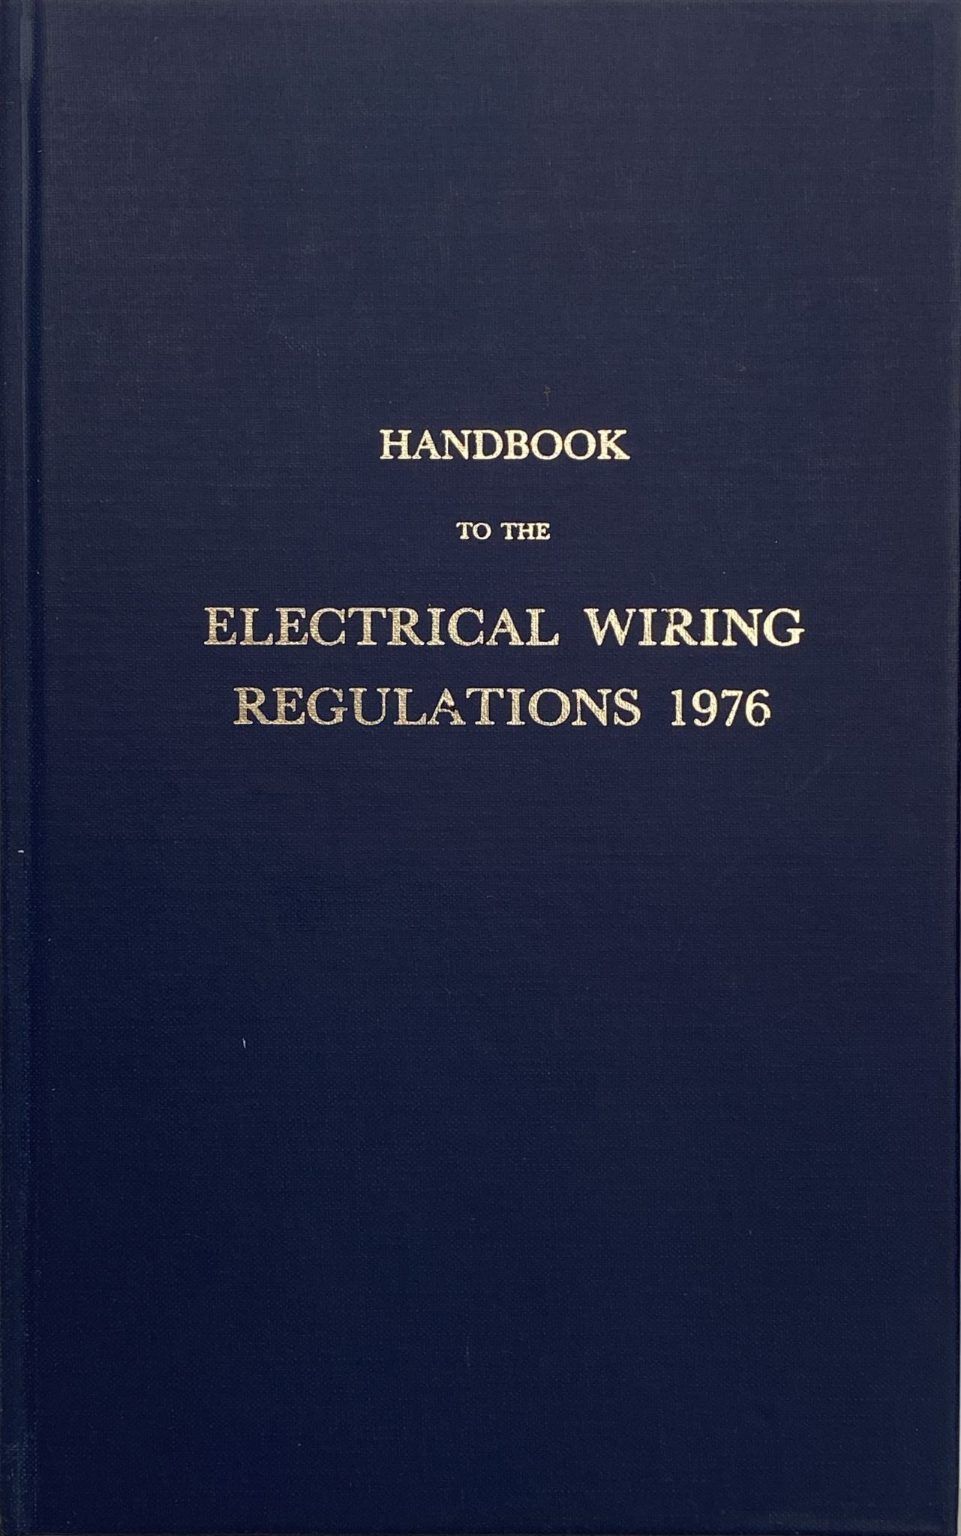 ELECTRICAL WIRING REGULATIONS 1976